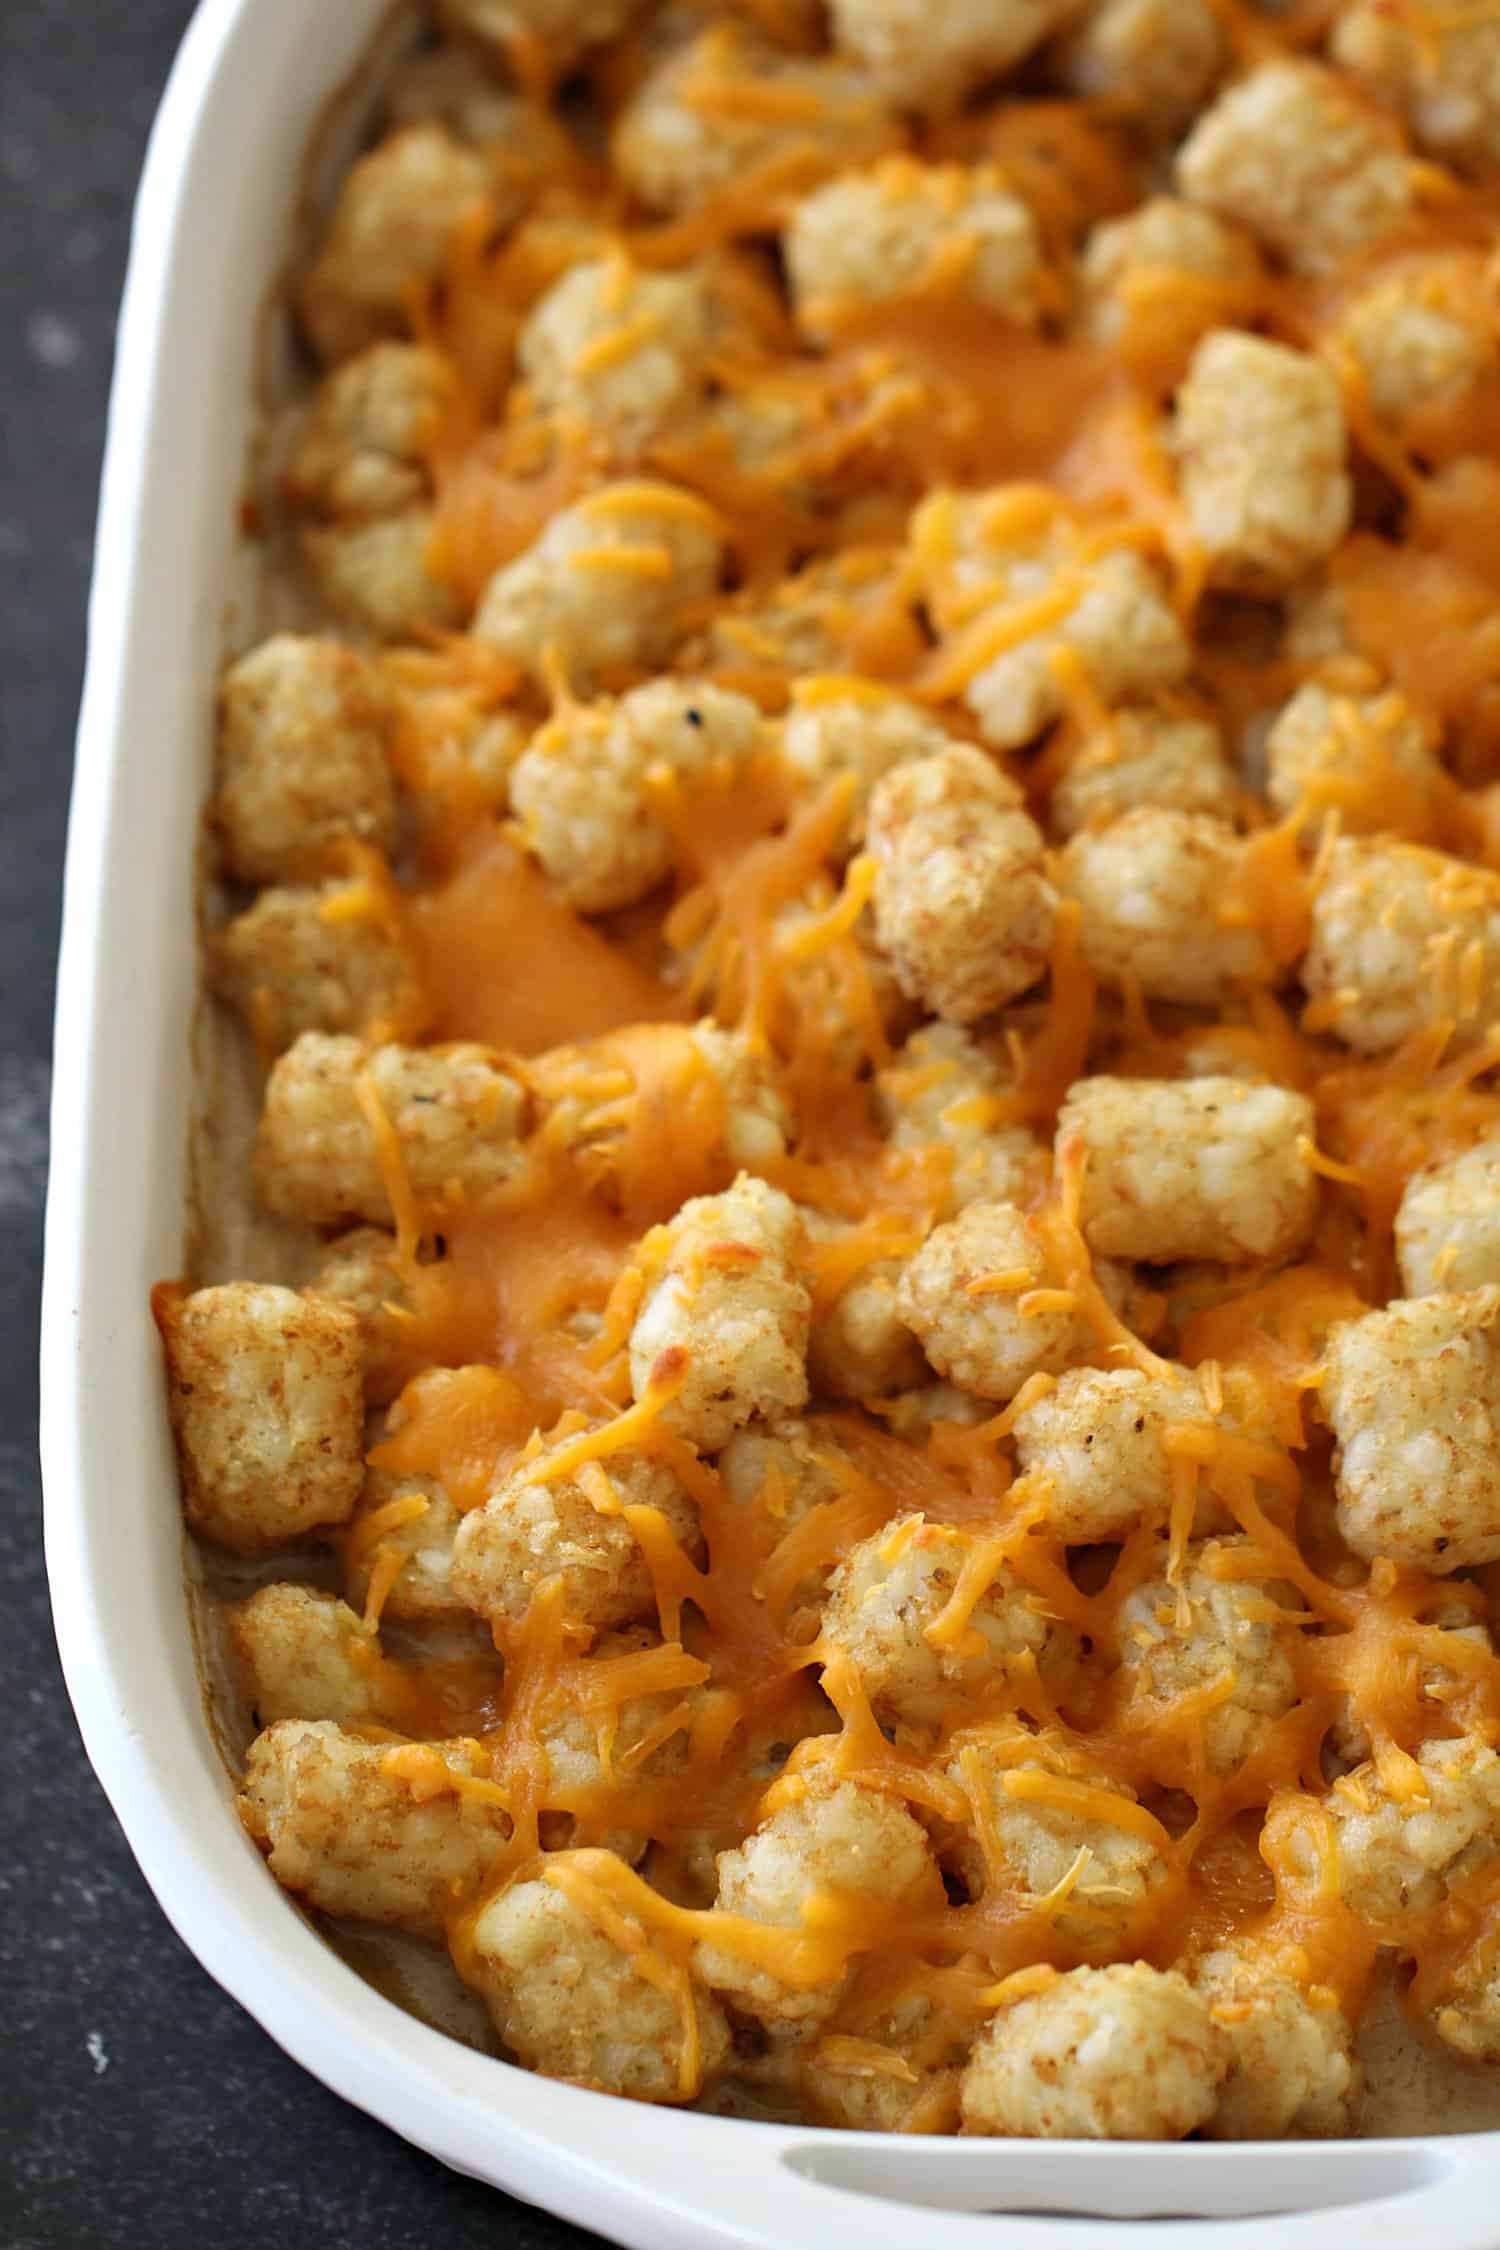 23 Dump-and-Bake Easy Casserole Recipes for Weeknight Dinners